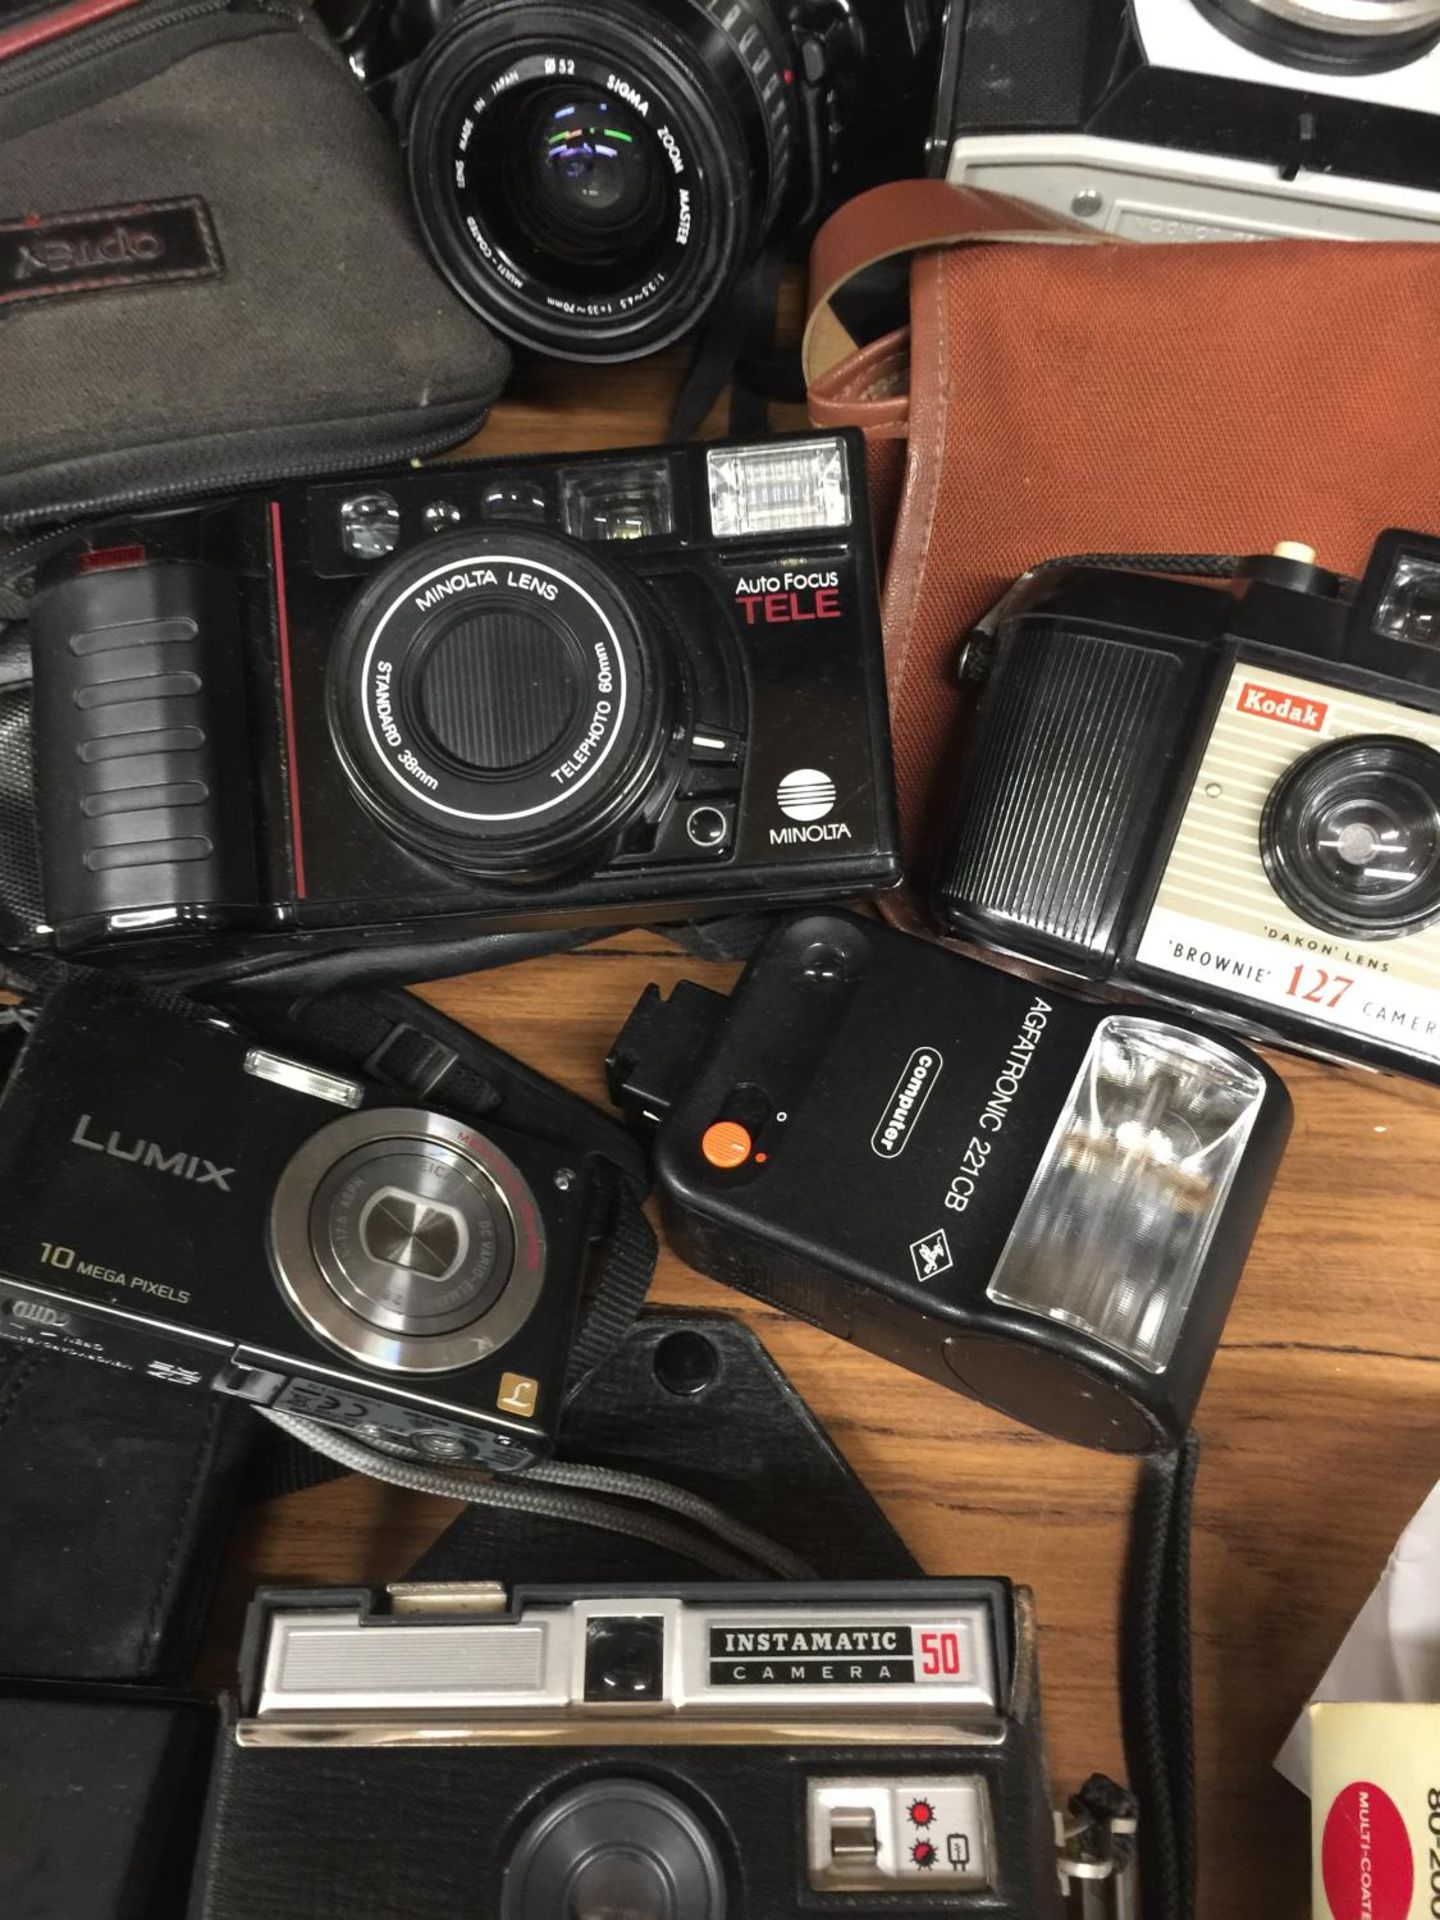 A COLLECTION OF VINTAGE CAMERAS AND ACCESSORIES TO INCLUDE A KODAK BROWNIE 127, MINOLTA AUTO FOCUS - Image 3 of 5